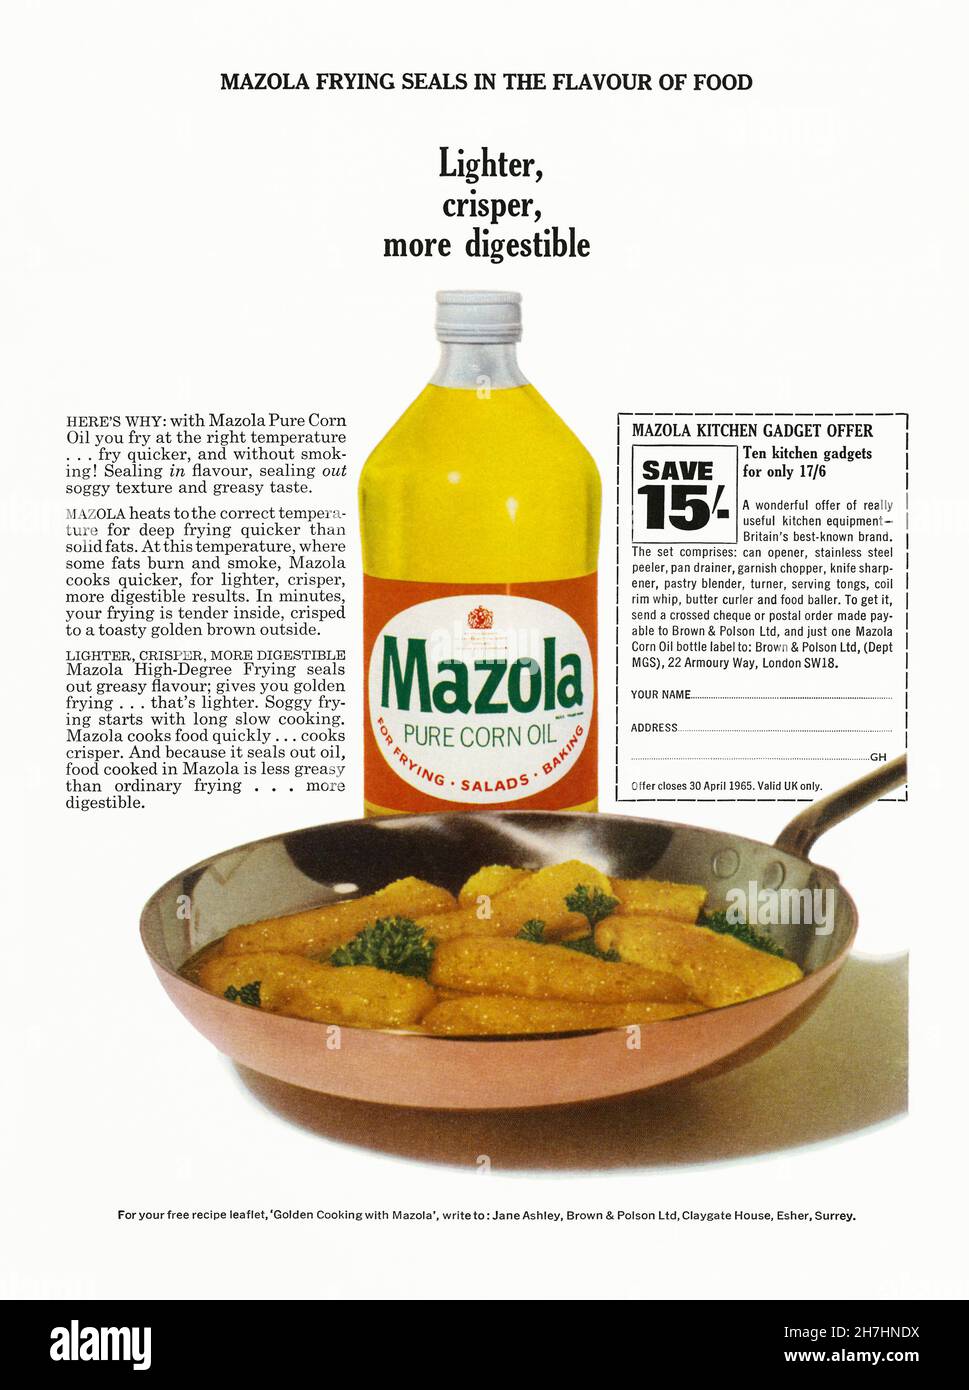 A 1960s advert for Mazola pure corn oil. The advert appeared in a magazine published in the UK in March 1965. The advert features a photograph of the product used to fry some fritters and emphasises the oil’s lighter and more digestible characteristics and its advantages over using solid fats. It was manufactured by Brown and Polson Ltd – vintage 1960s graphics for editorial use. Stock Photo